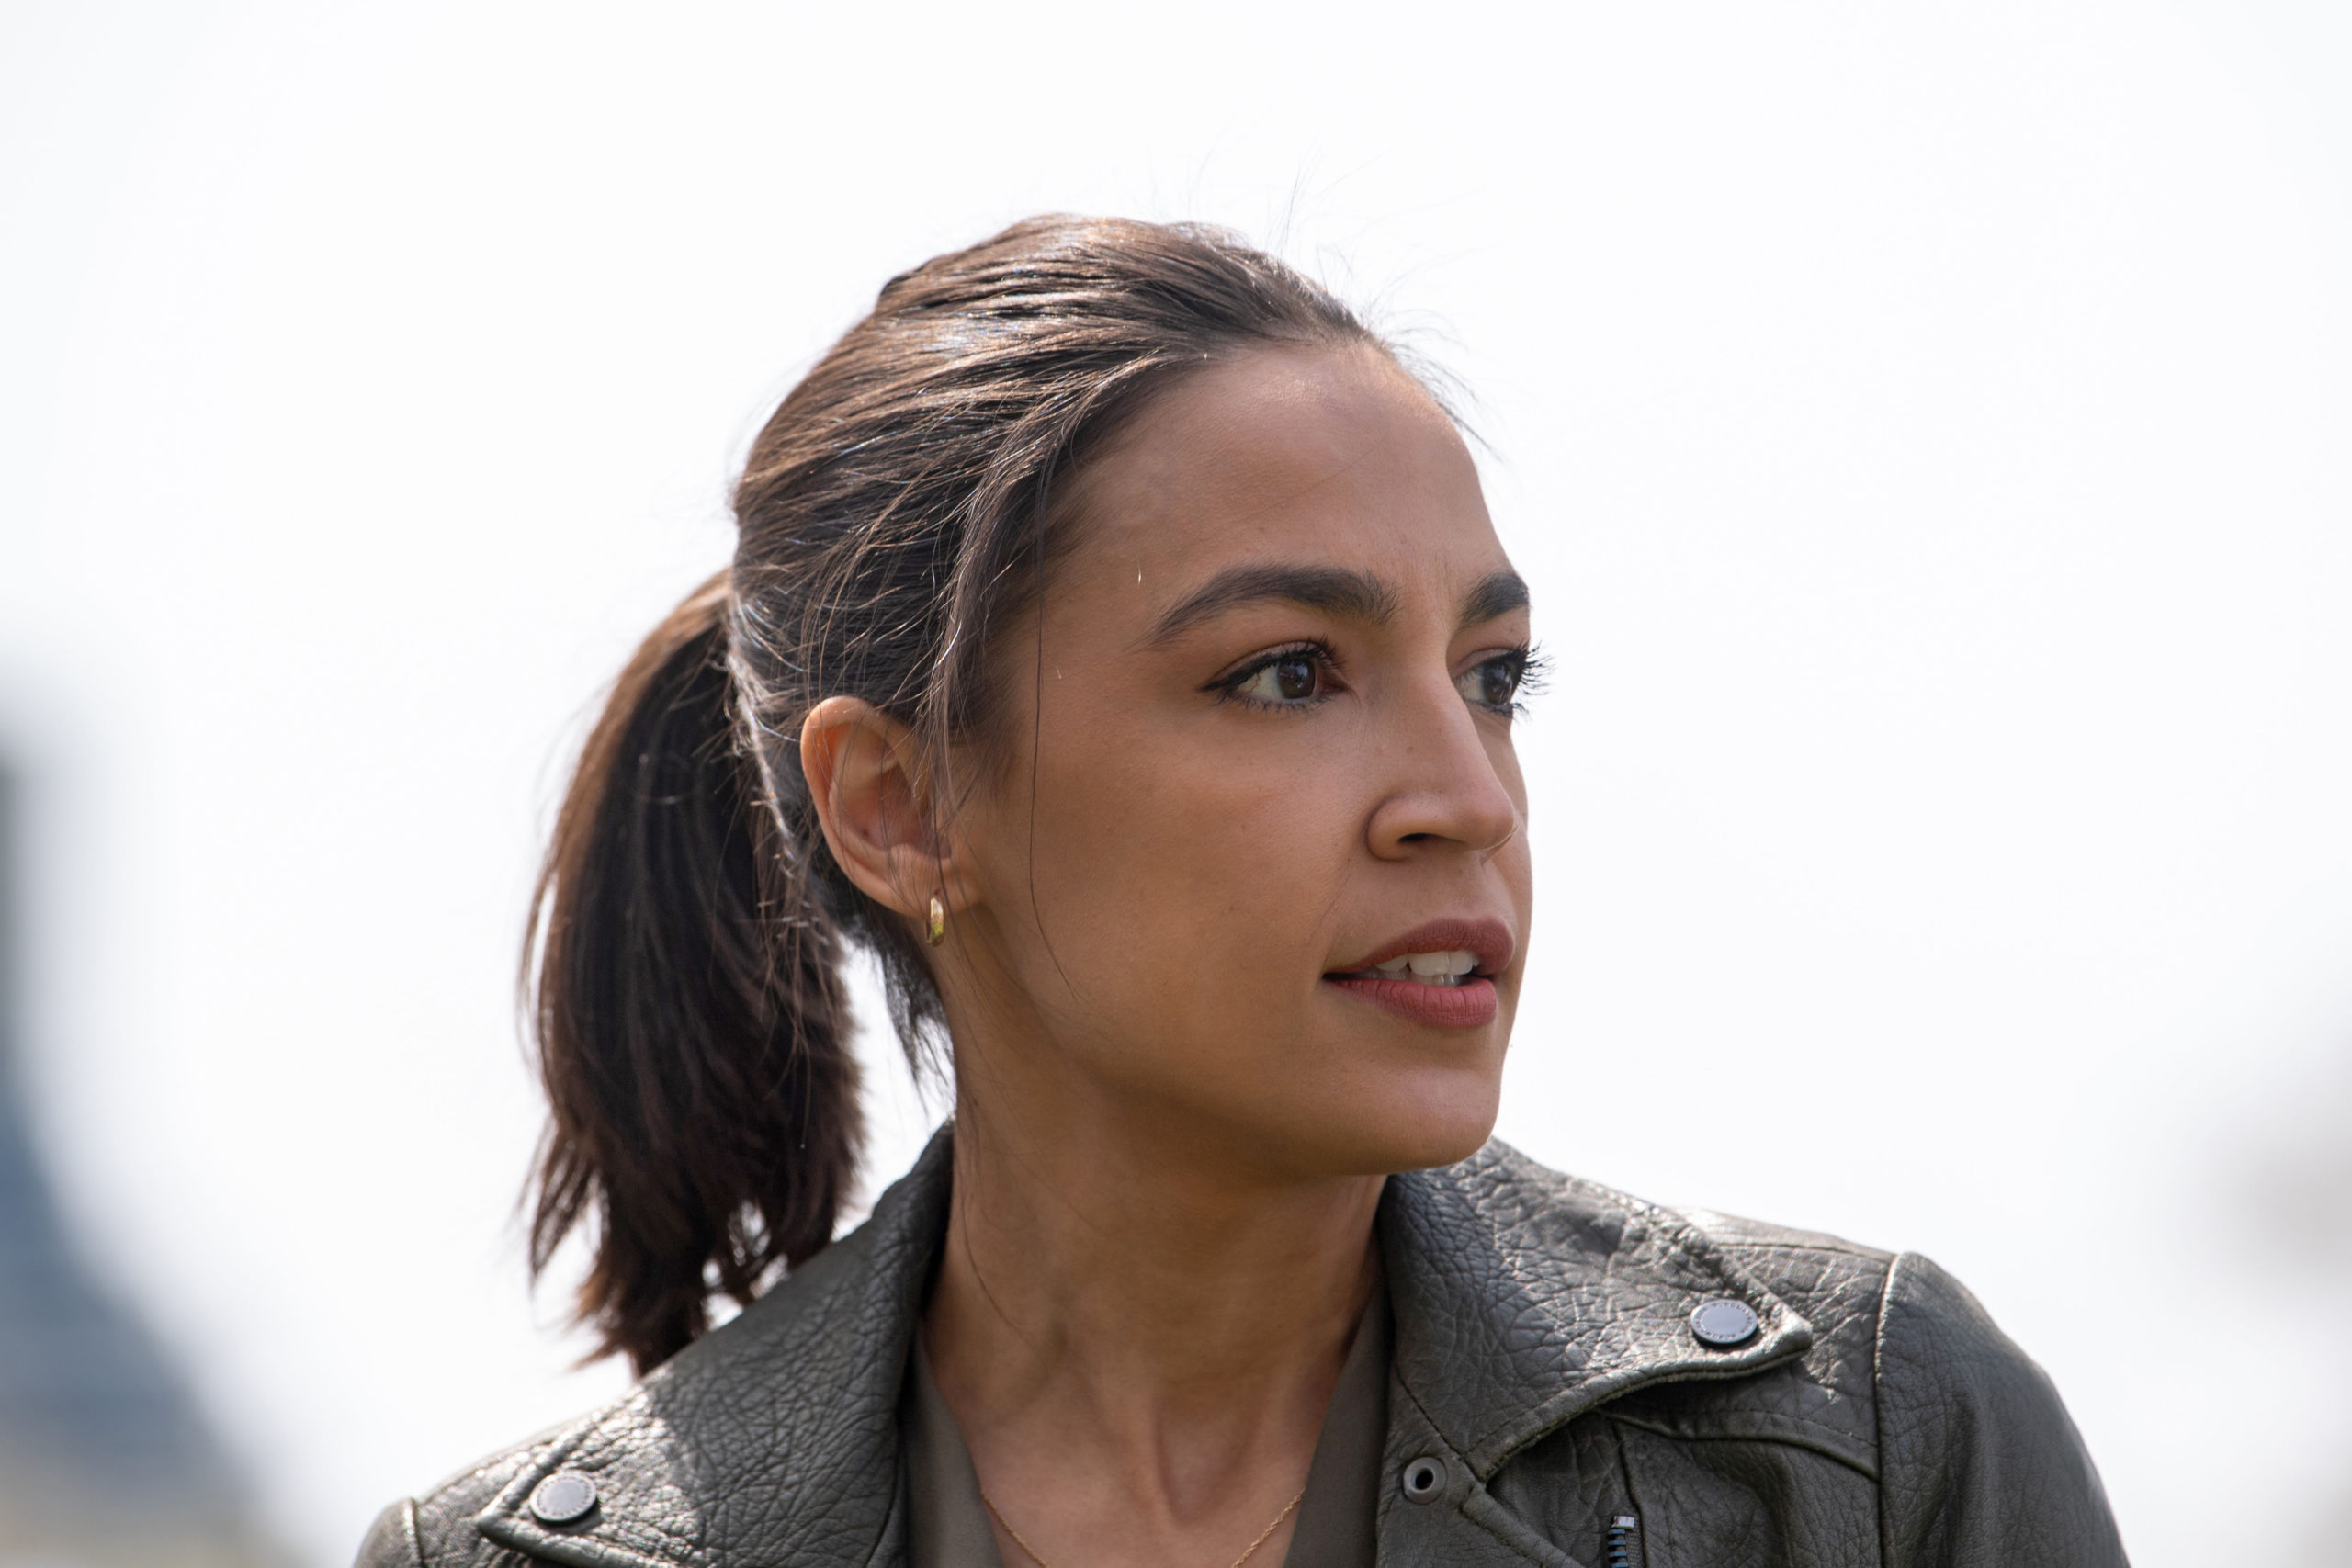 AOC Joins Forces With GOP Lawmaker On Bill To Help States Expunge Cannabis Records